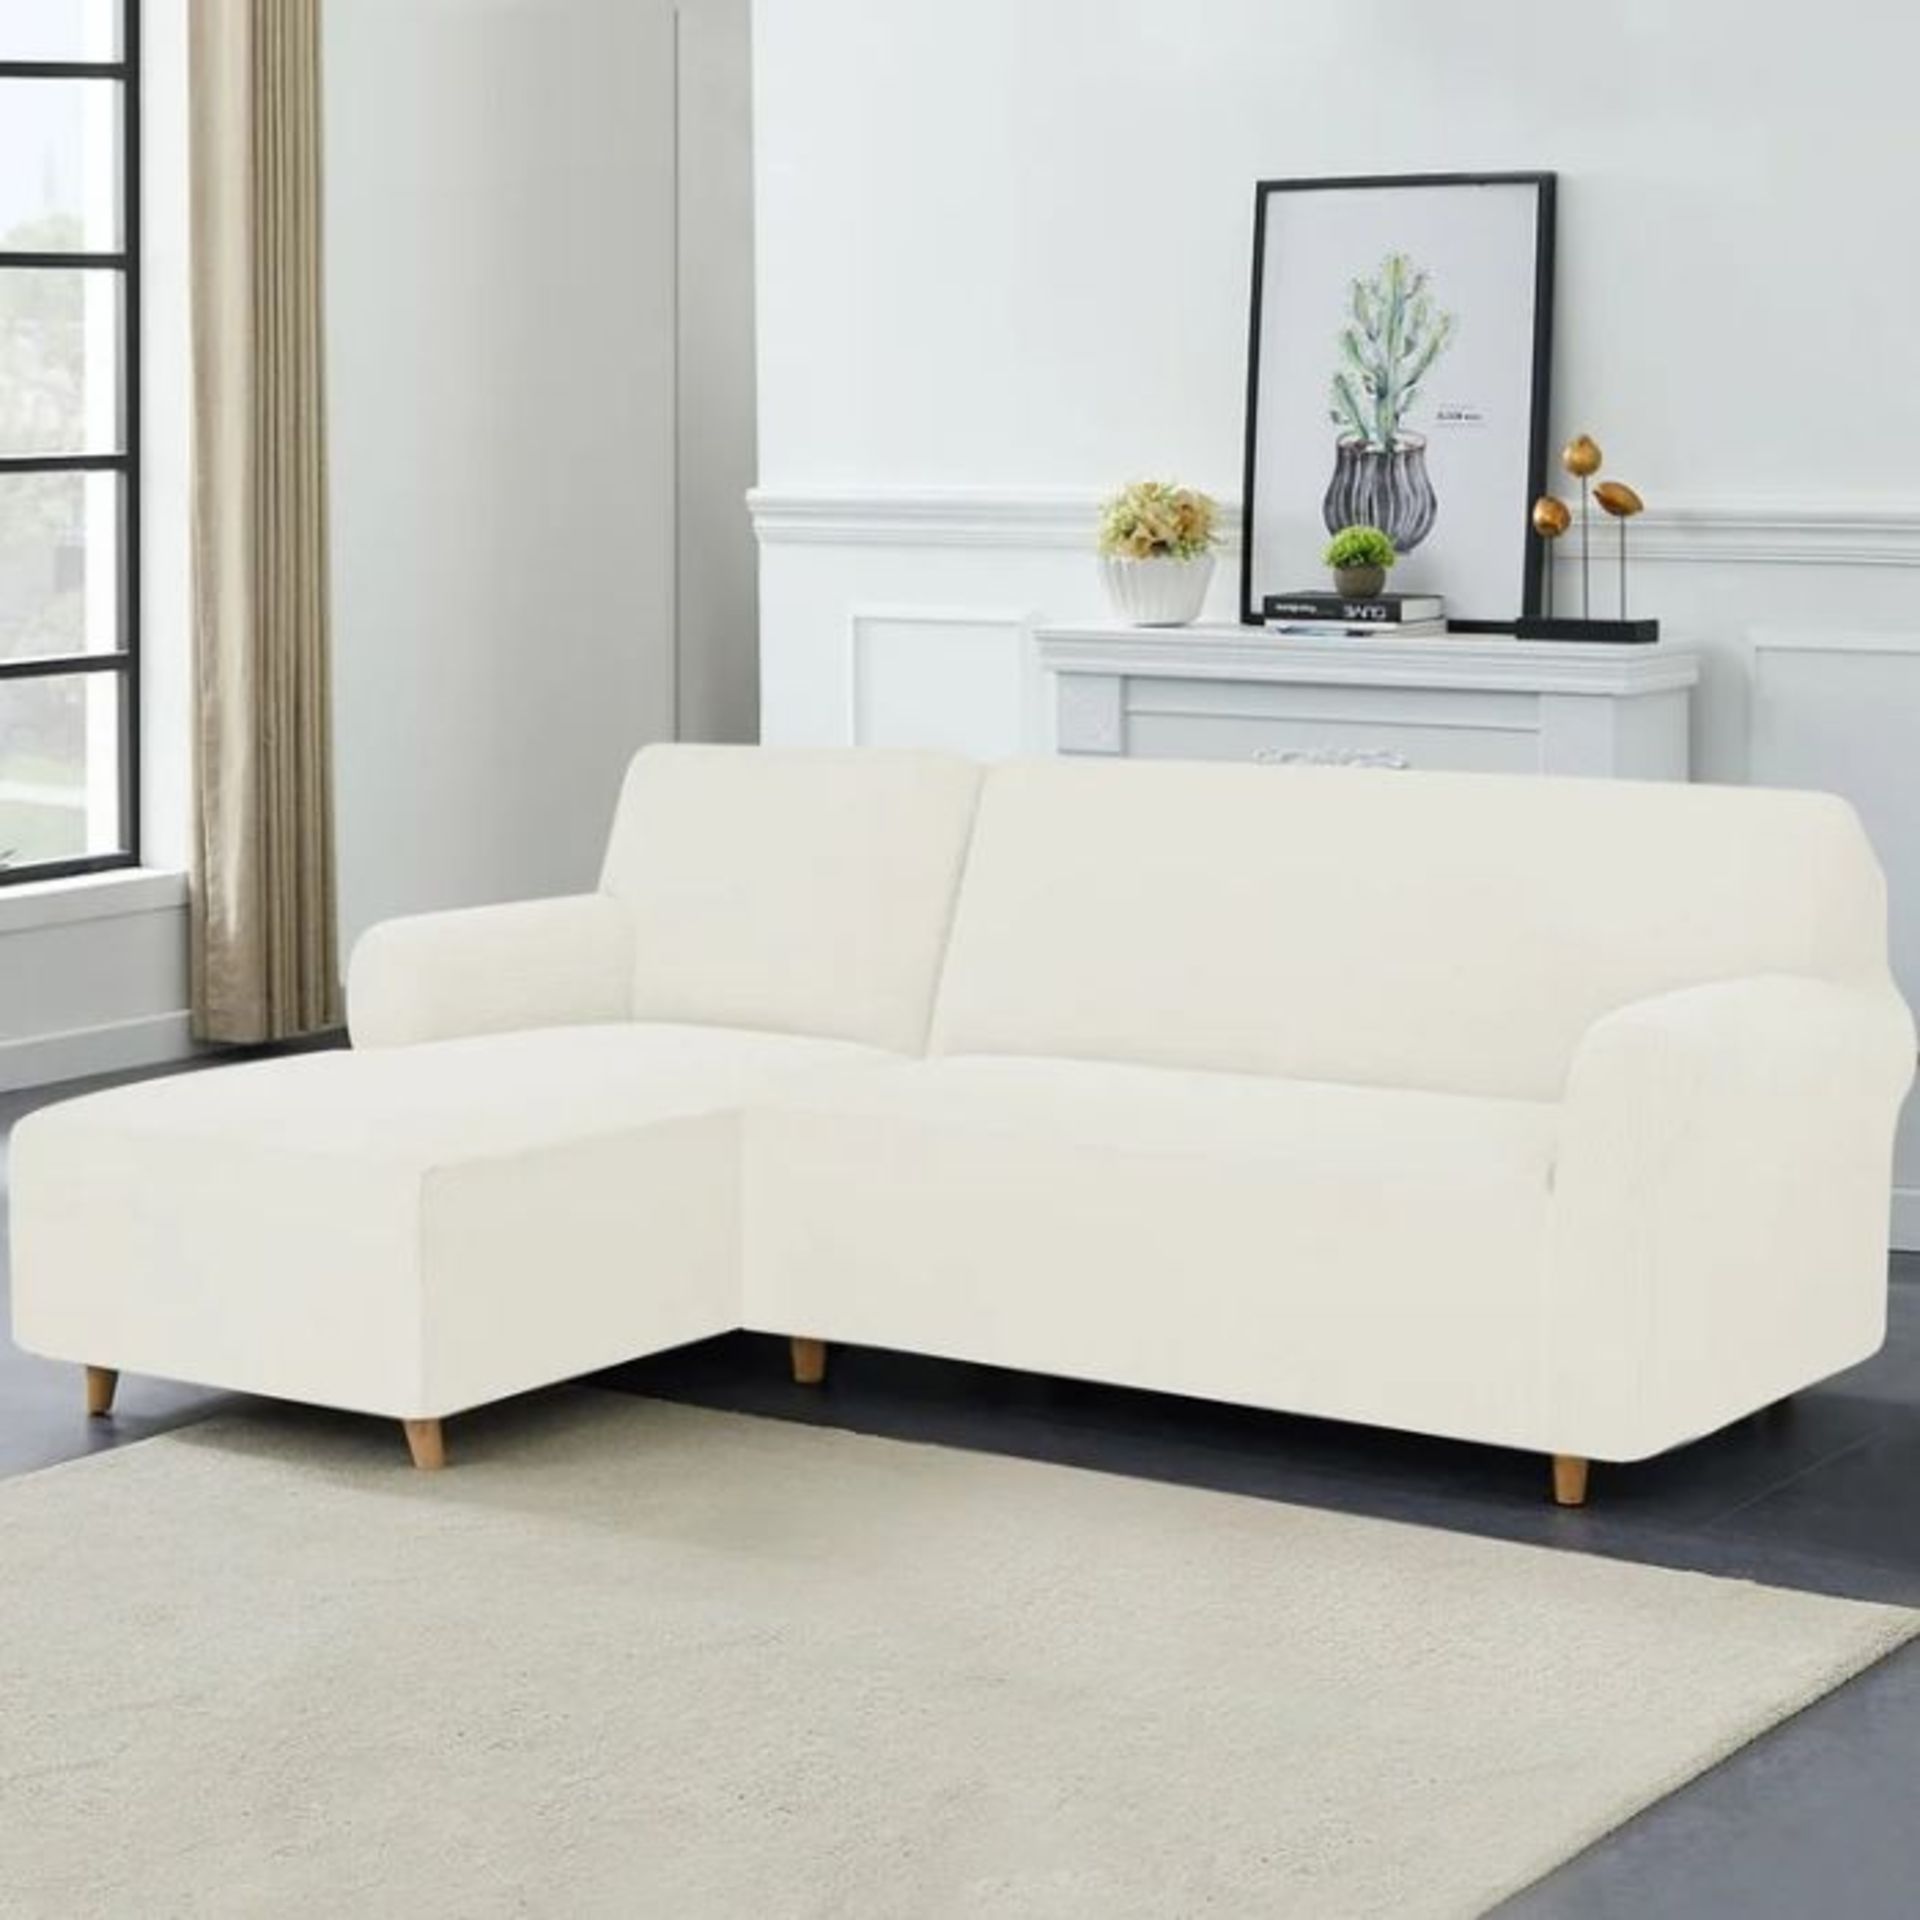 Rosalind Wheeler, Textured Grid Soft Stretchy Left Chaise L-Shaped Sofa Slipcover (WHITE) (105cm H X